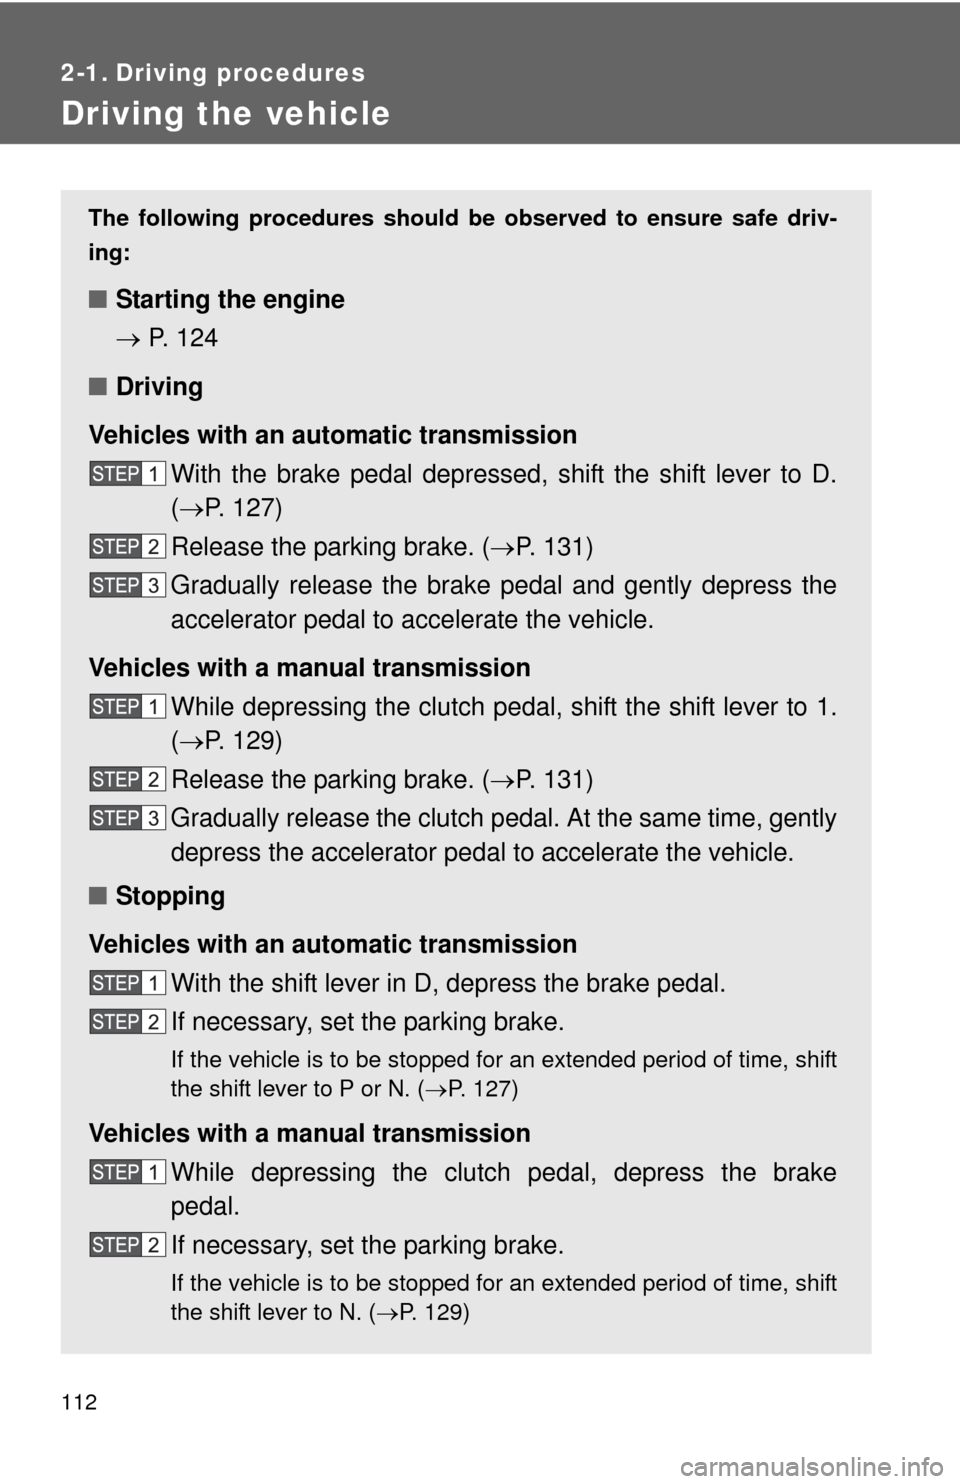 TOYOTA YARIS 2012 3.G Owners Manual 112
2-1. Driving procedures
Driving the vehicle
The following procedures should be observed to ensure safe driv-
ing:
■ Starting the engine
 P.  1 2 4
■ Driving
Vehicles with an au tomatic tran